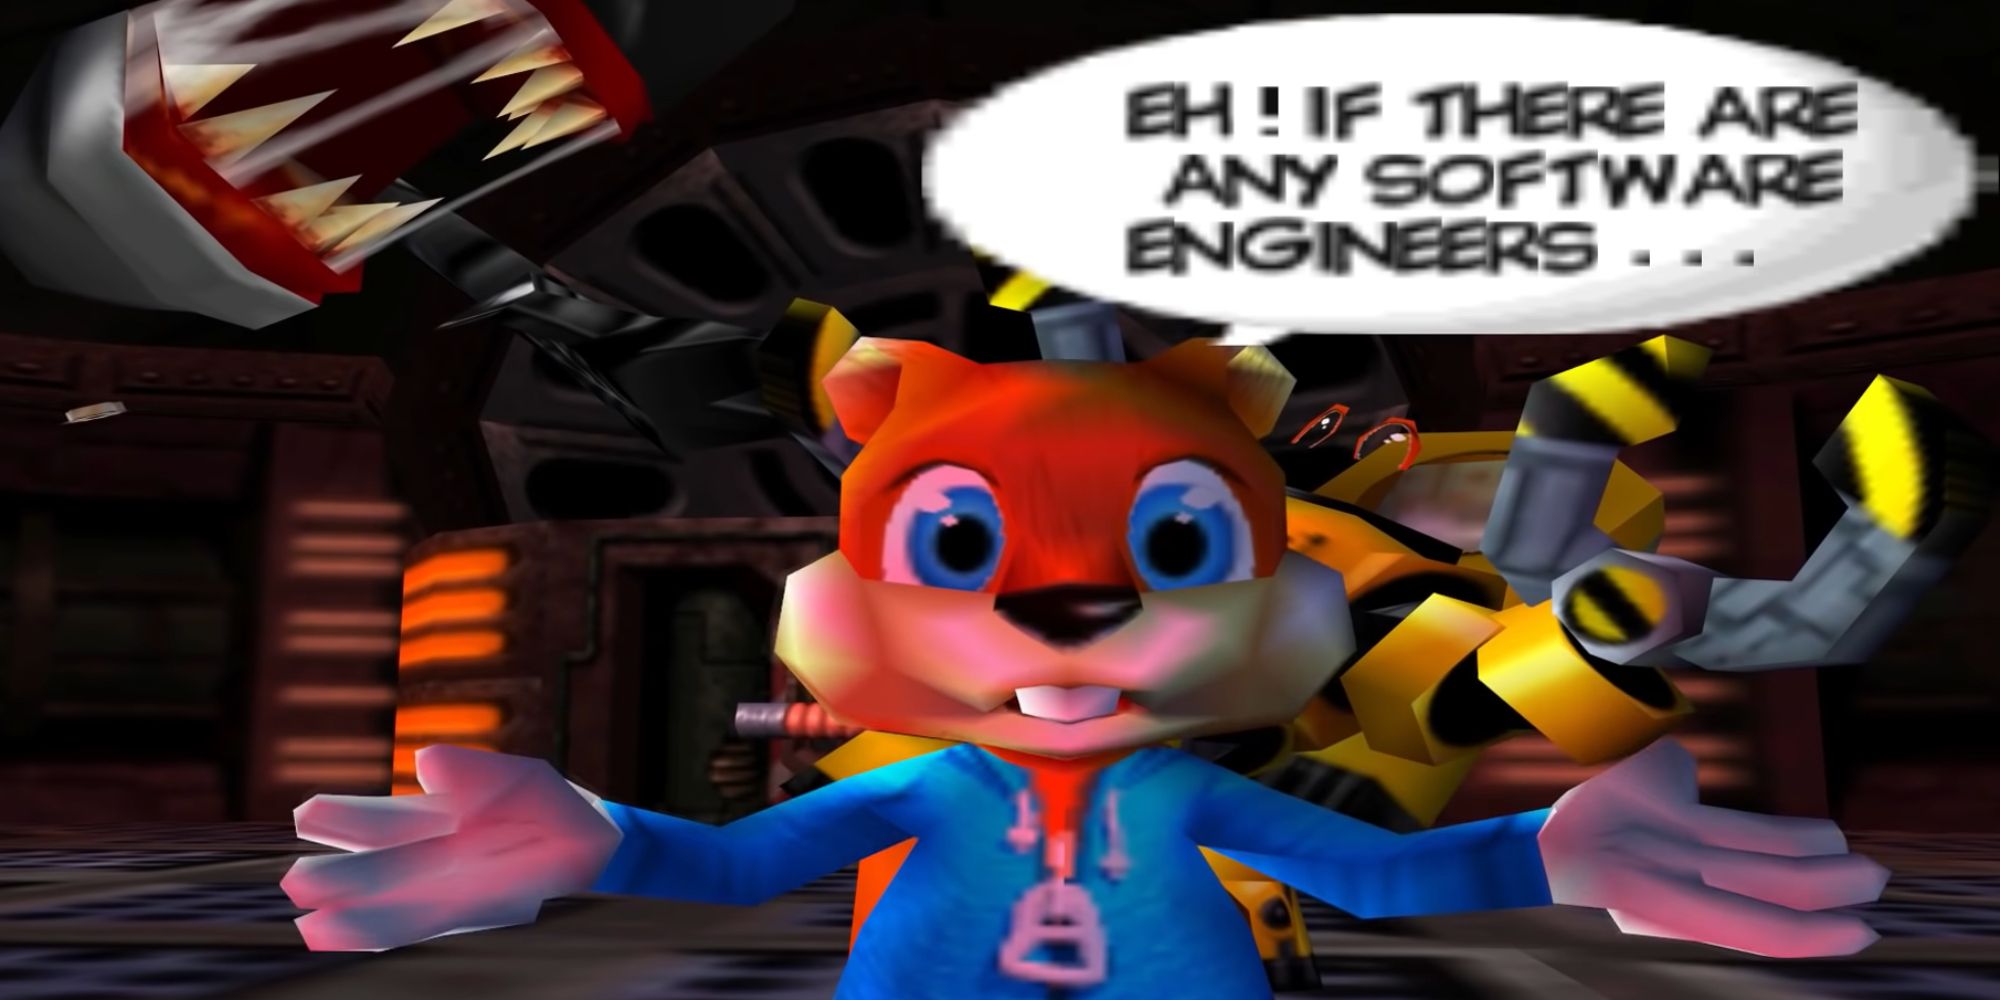 Conker Bad Fur Day Screenshot Of Conker Breaking Down Fourth Wall and Talking To Engineers